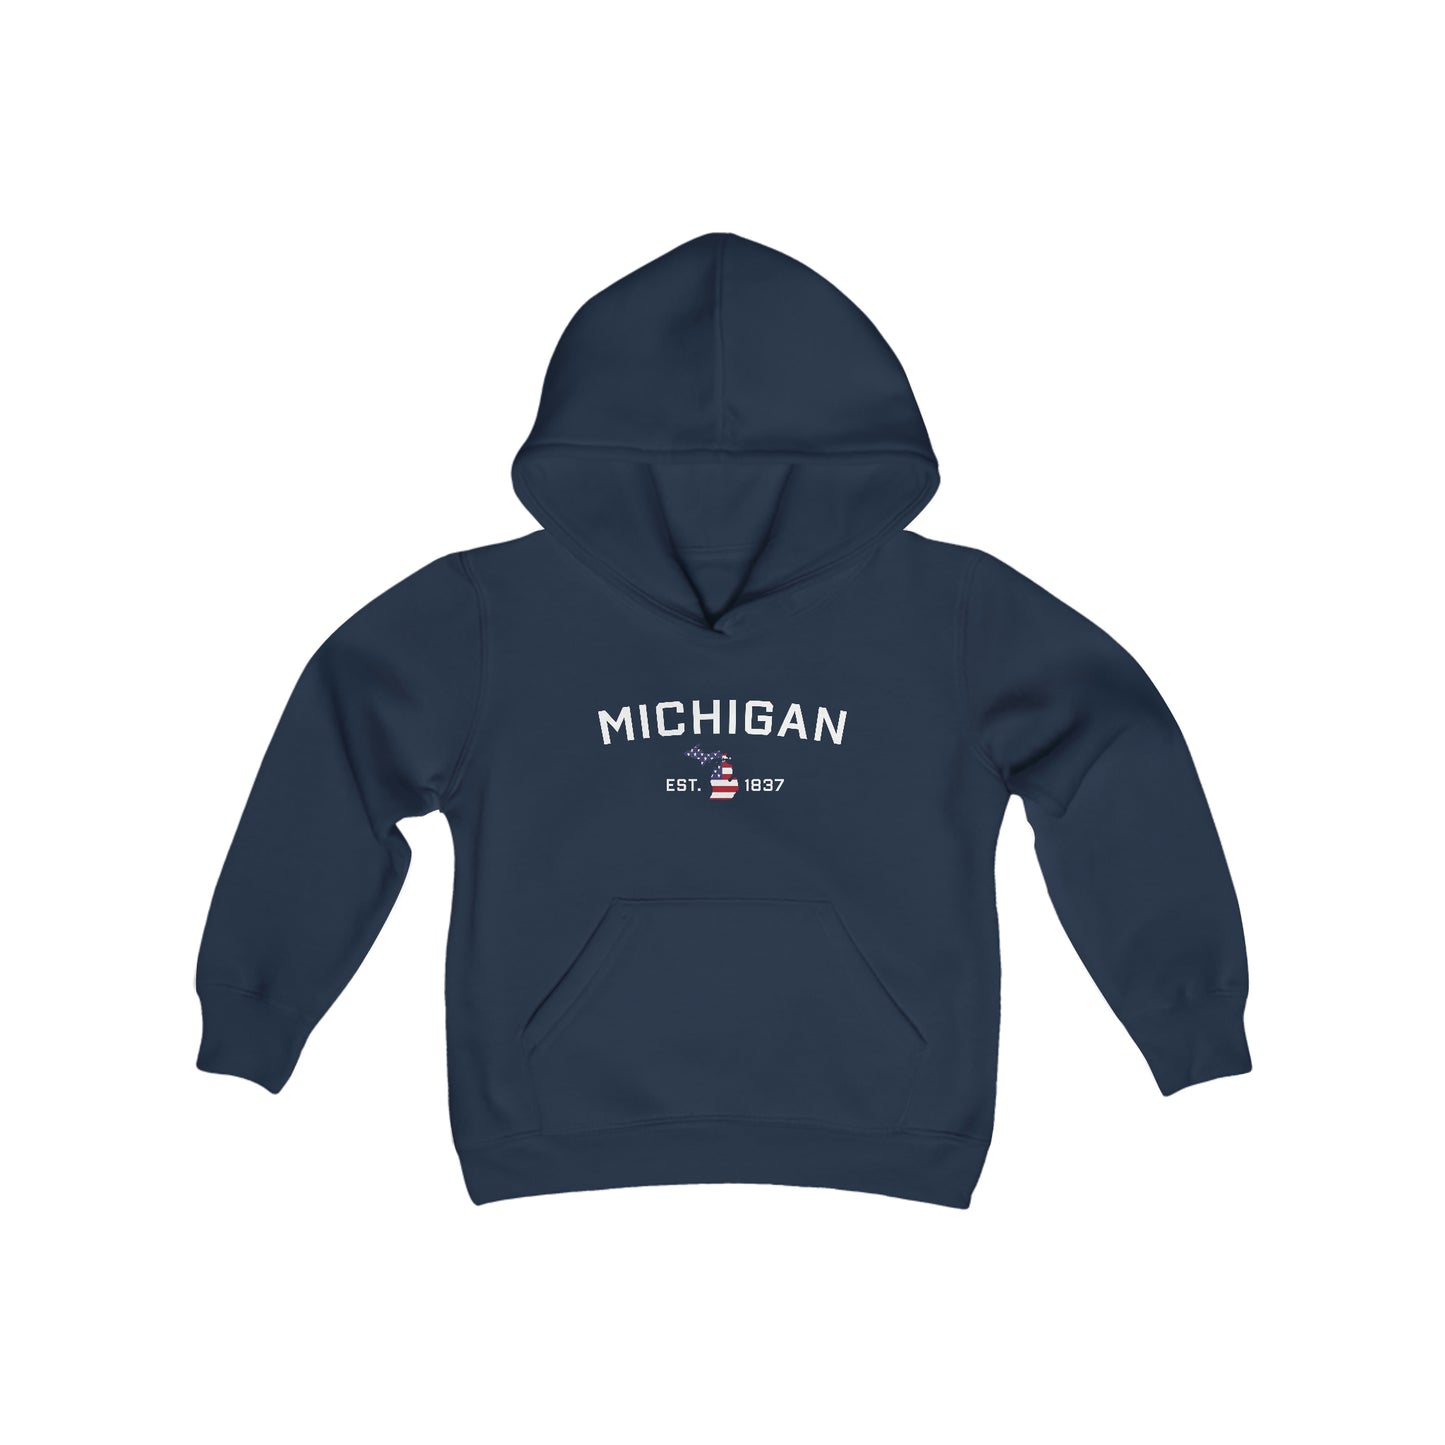 'Michigan EST 1837' Hoodie (w/USA Flag Outline) | Unisex Youth